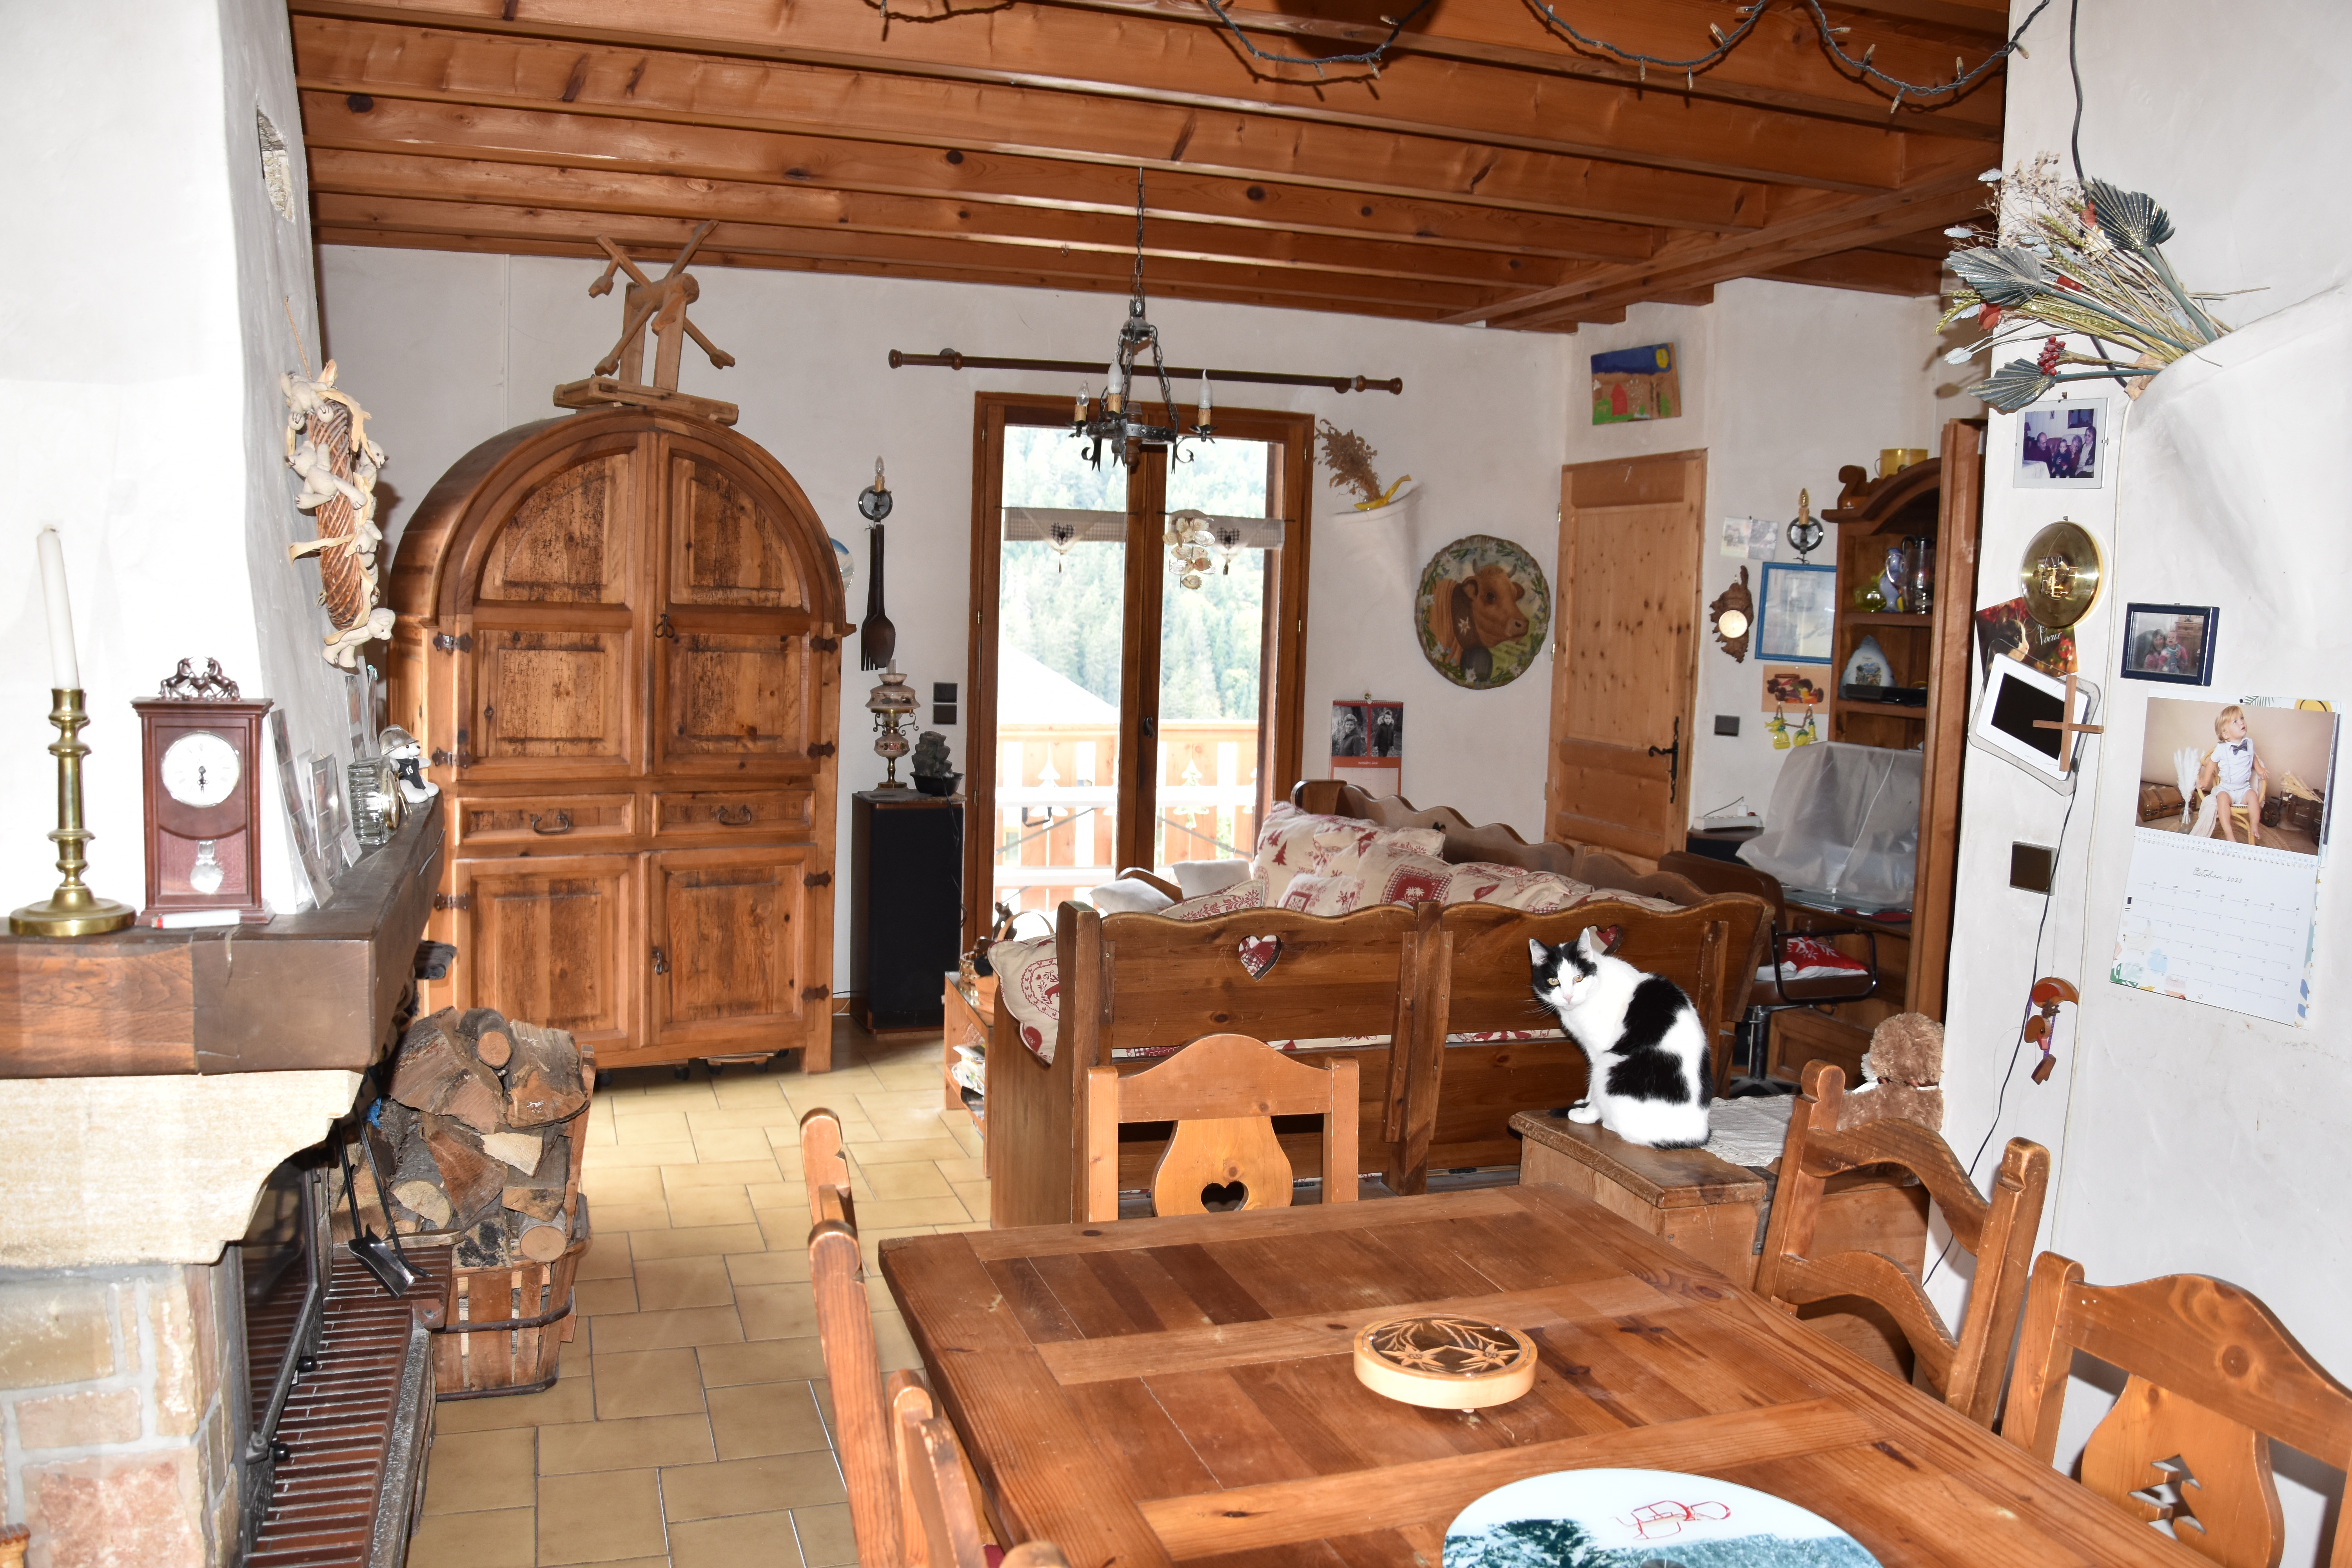 Sale : Spacious chalet with land